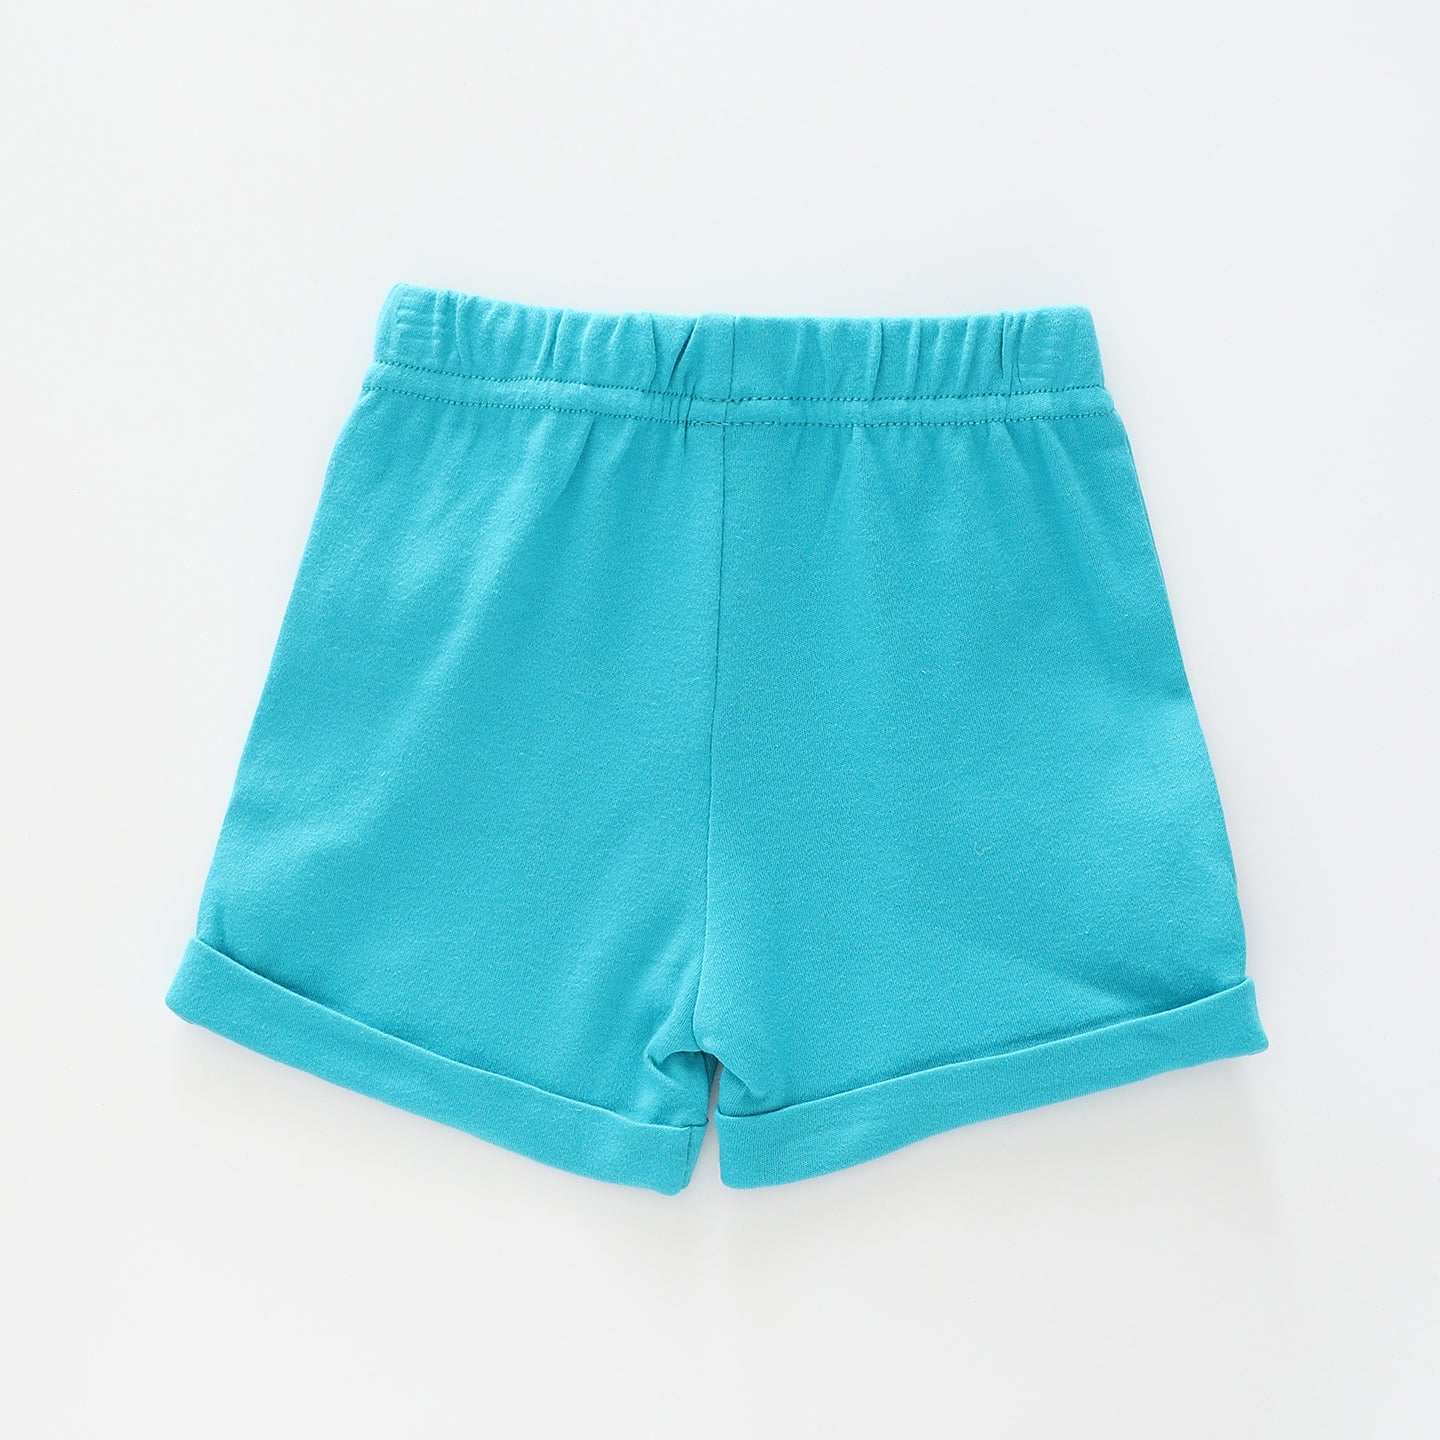 Baby Boys Teal Blue Knit Shorts